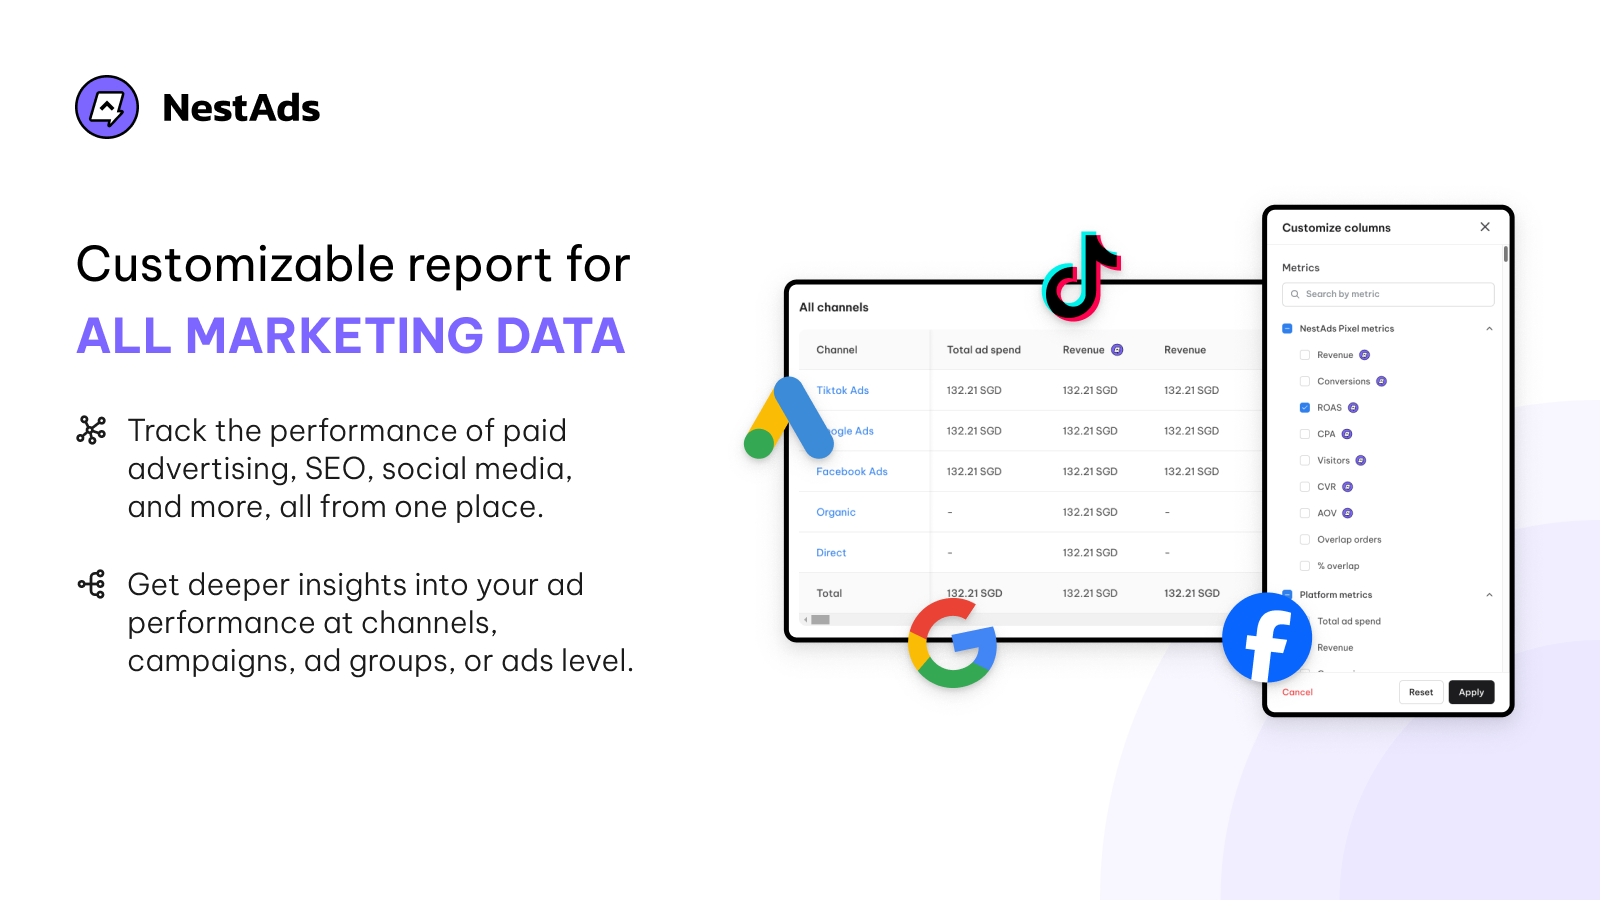 Customizable report for all marketing data